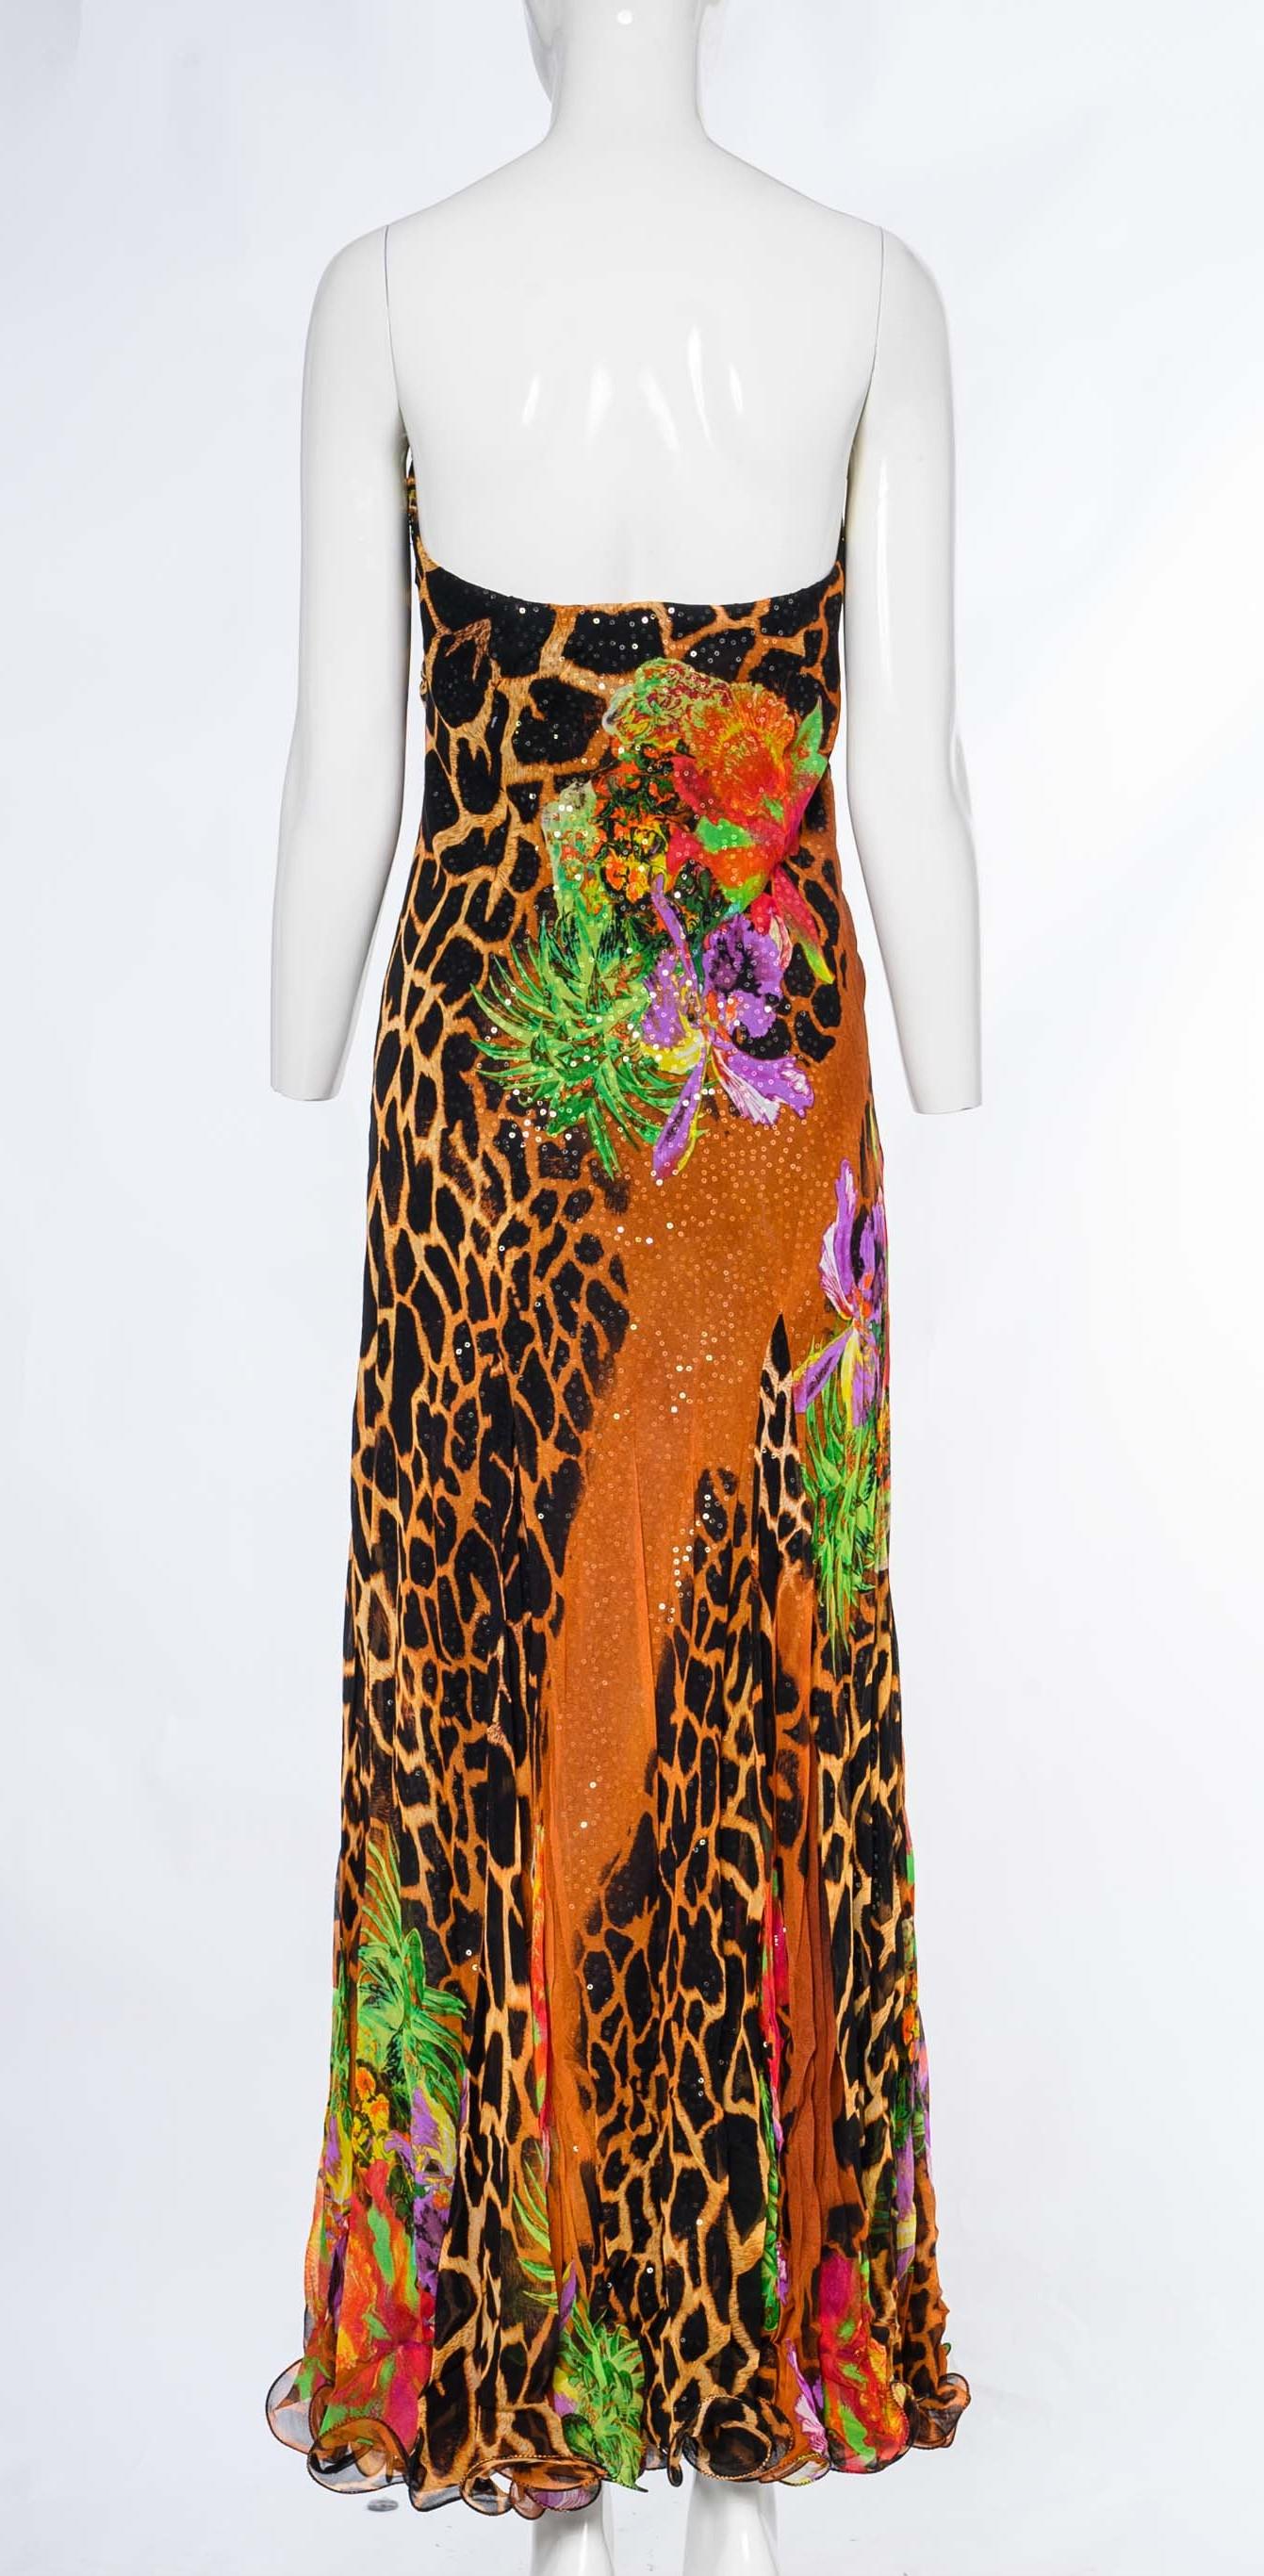 The vintage Diane Freis sequin evening dress is an exquisite and glamorous piece that is guaranteed to leave a lasting impression. With its bold leopard print and tropical floral motif, this dress exudes an air of captivating allure and exotic